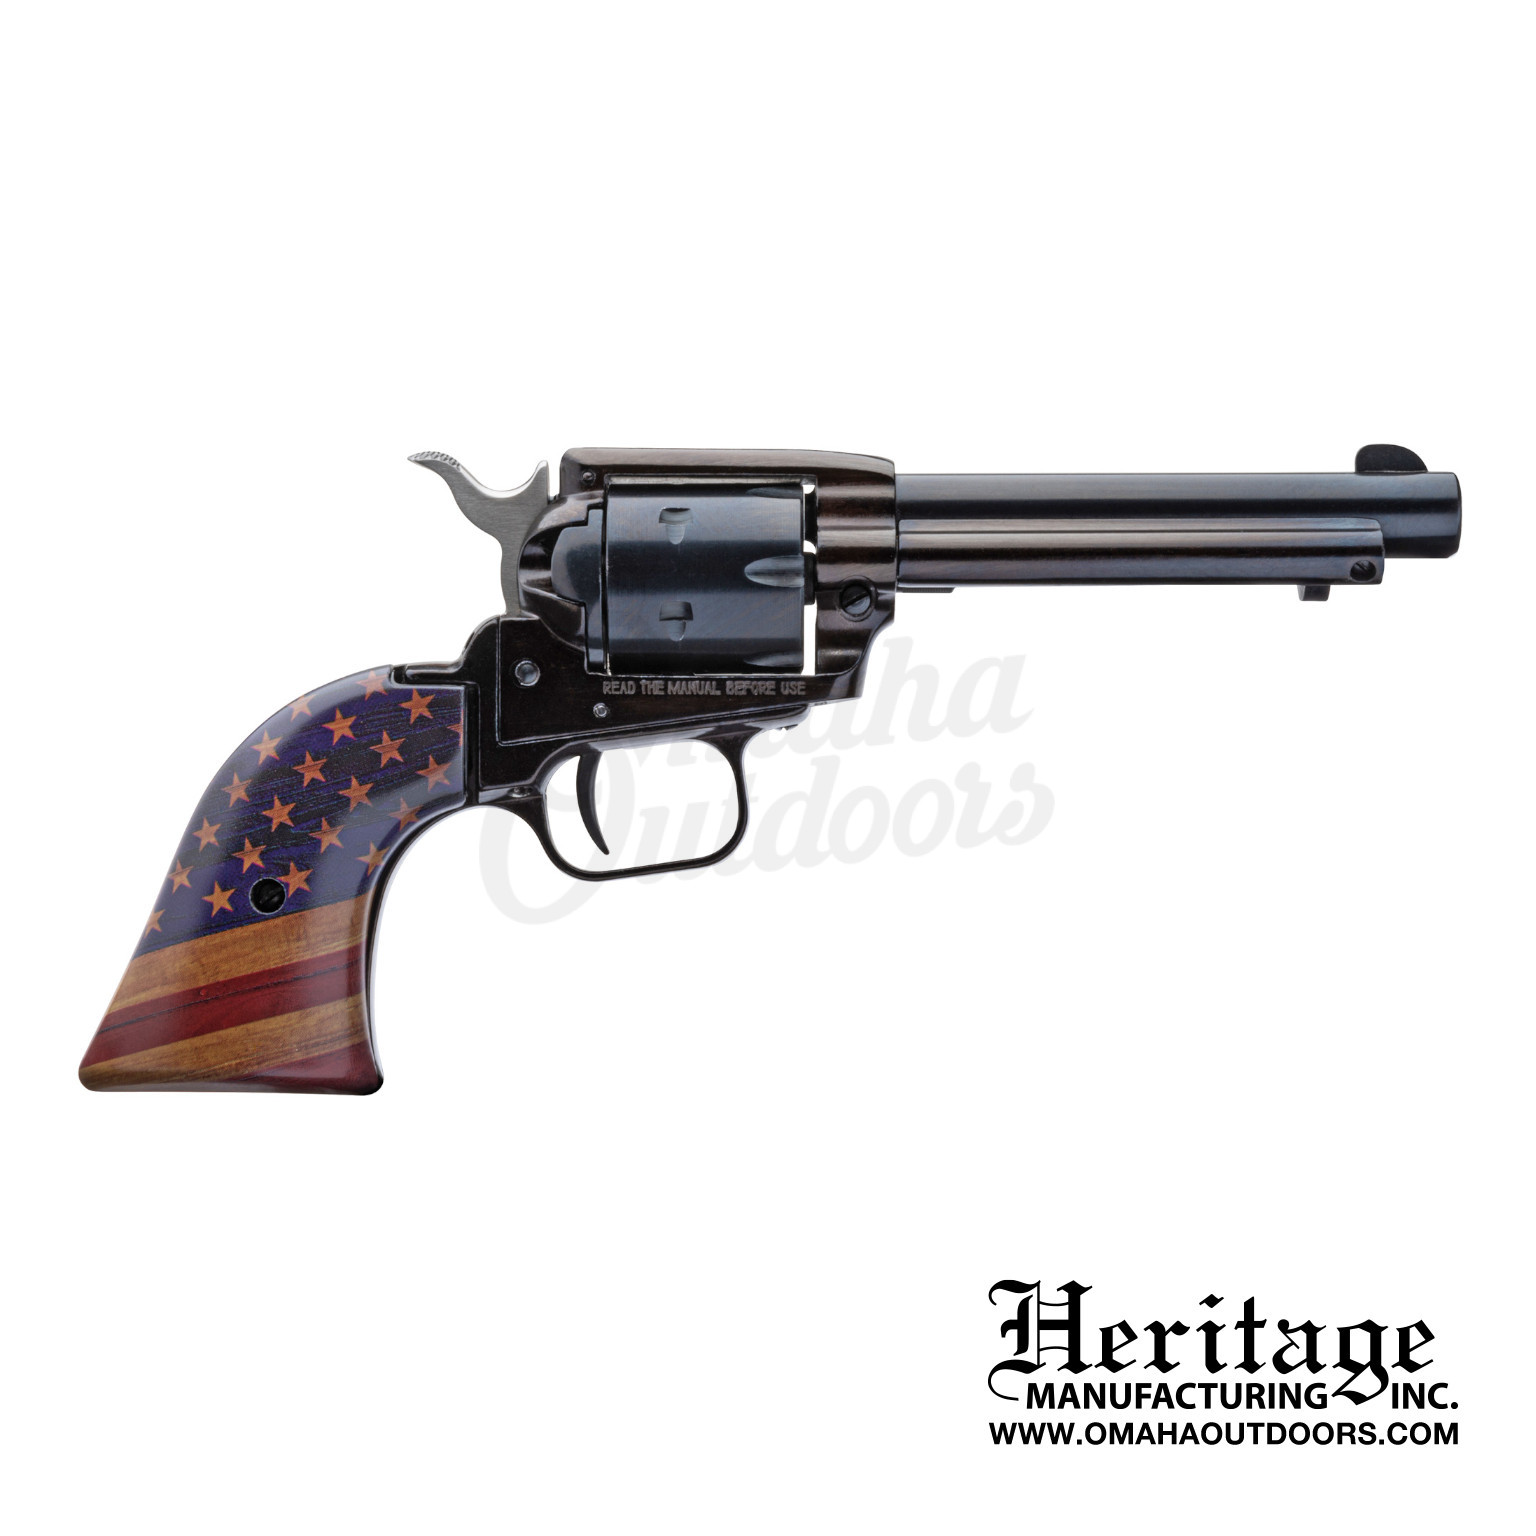 Heritage Rough Rider American Flag Single-Action Revolver Two